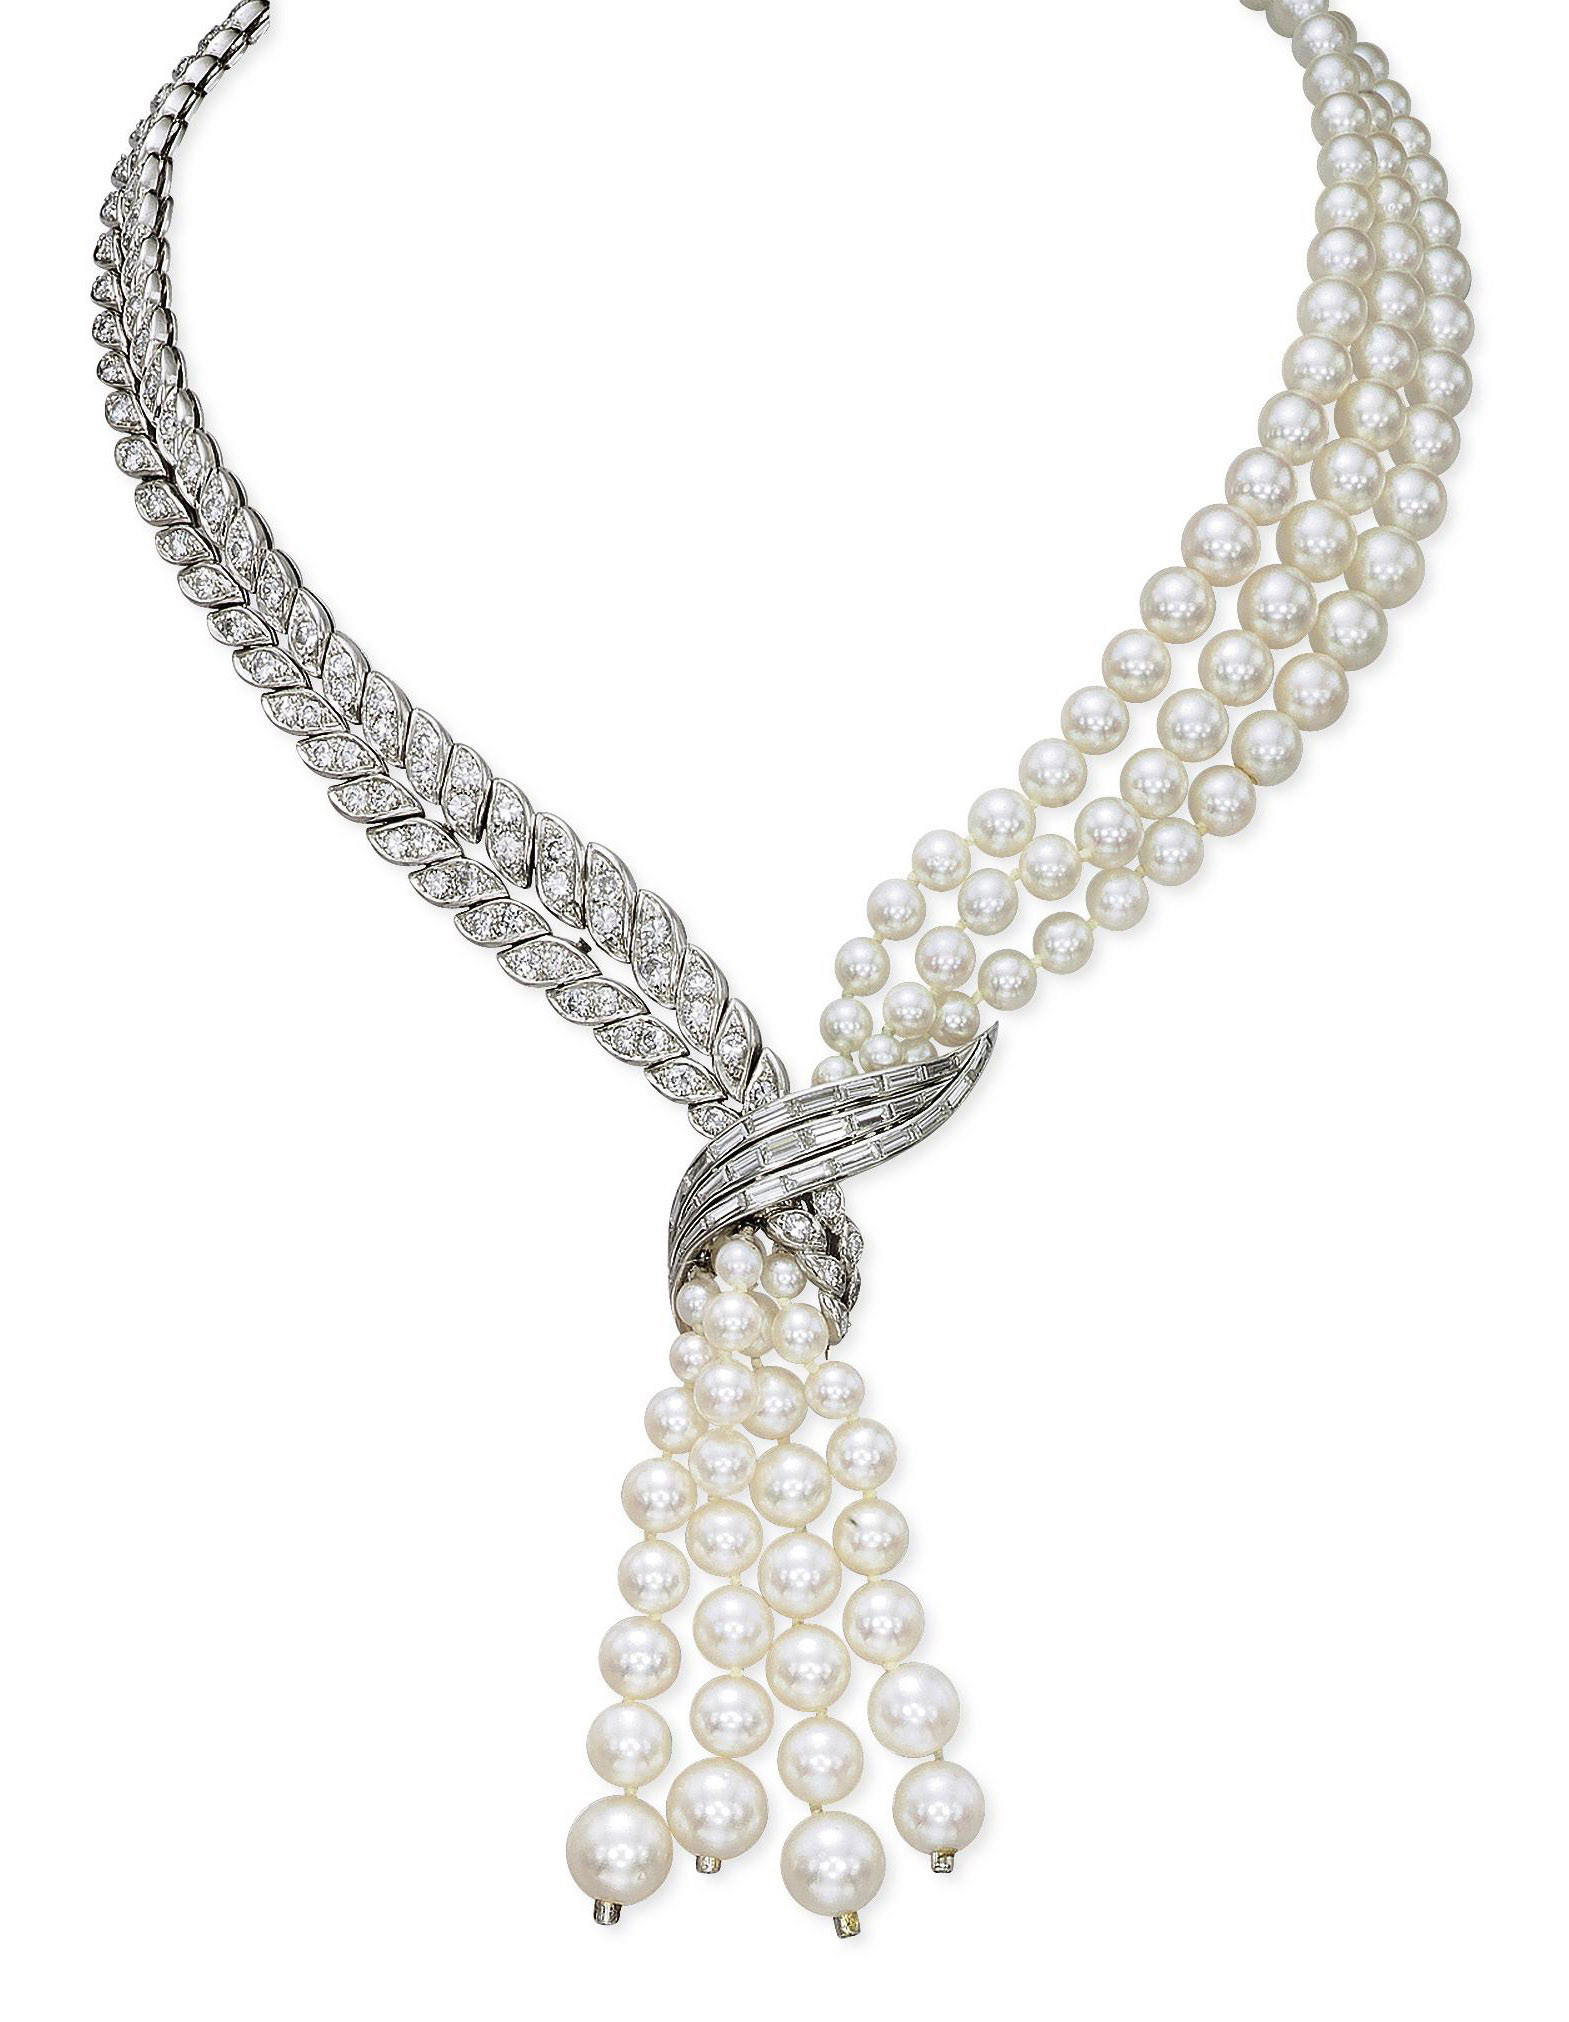 Pearl And Diamond Necklace
 A CULTURED PEARL AND DIAMOND NECKLACE BY STERLÉ